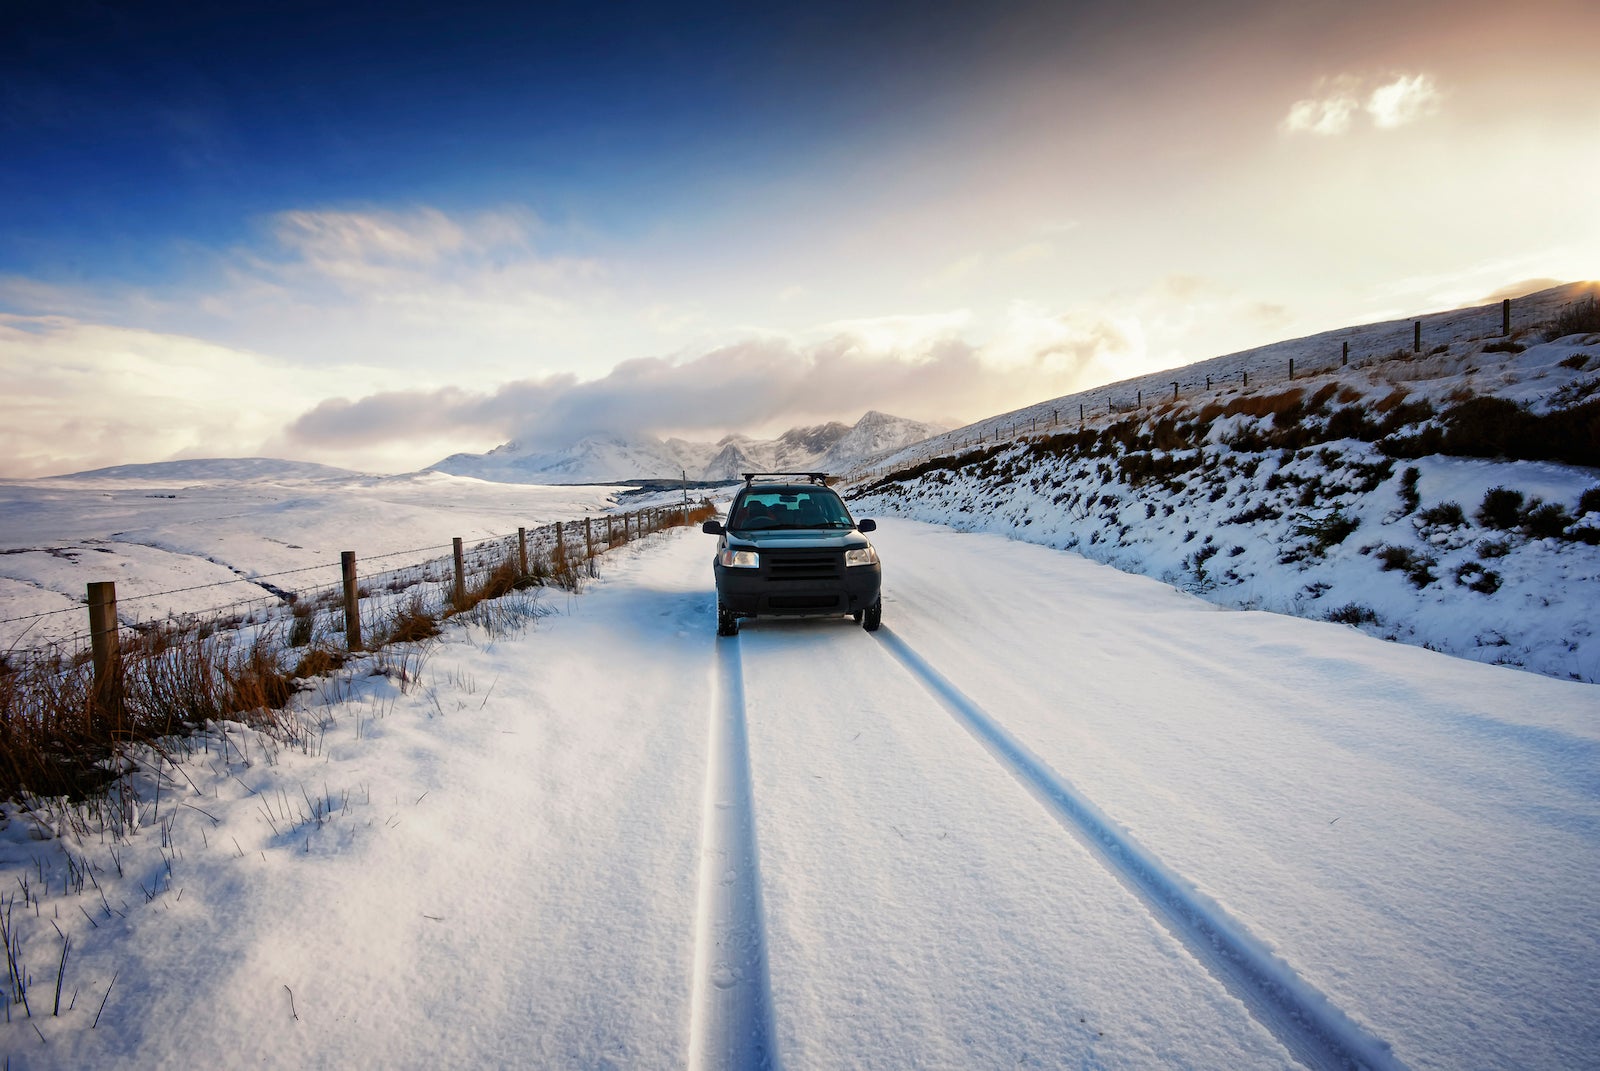 UK, Scotland, Isle of Skye, Cuillin Mountains, four wheel drive vehicle driving on snow-covered street